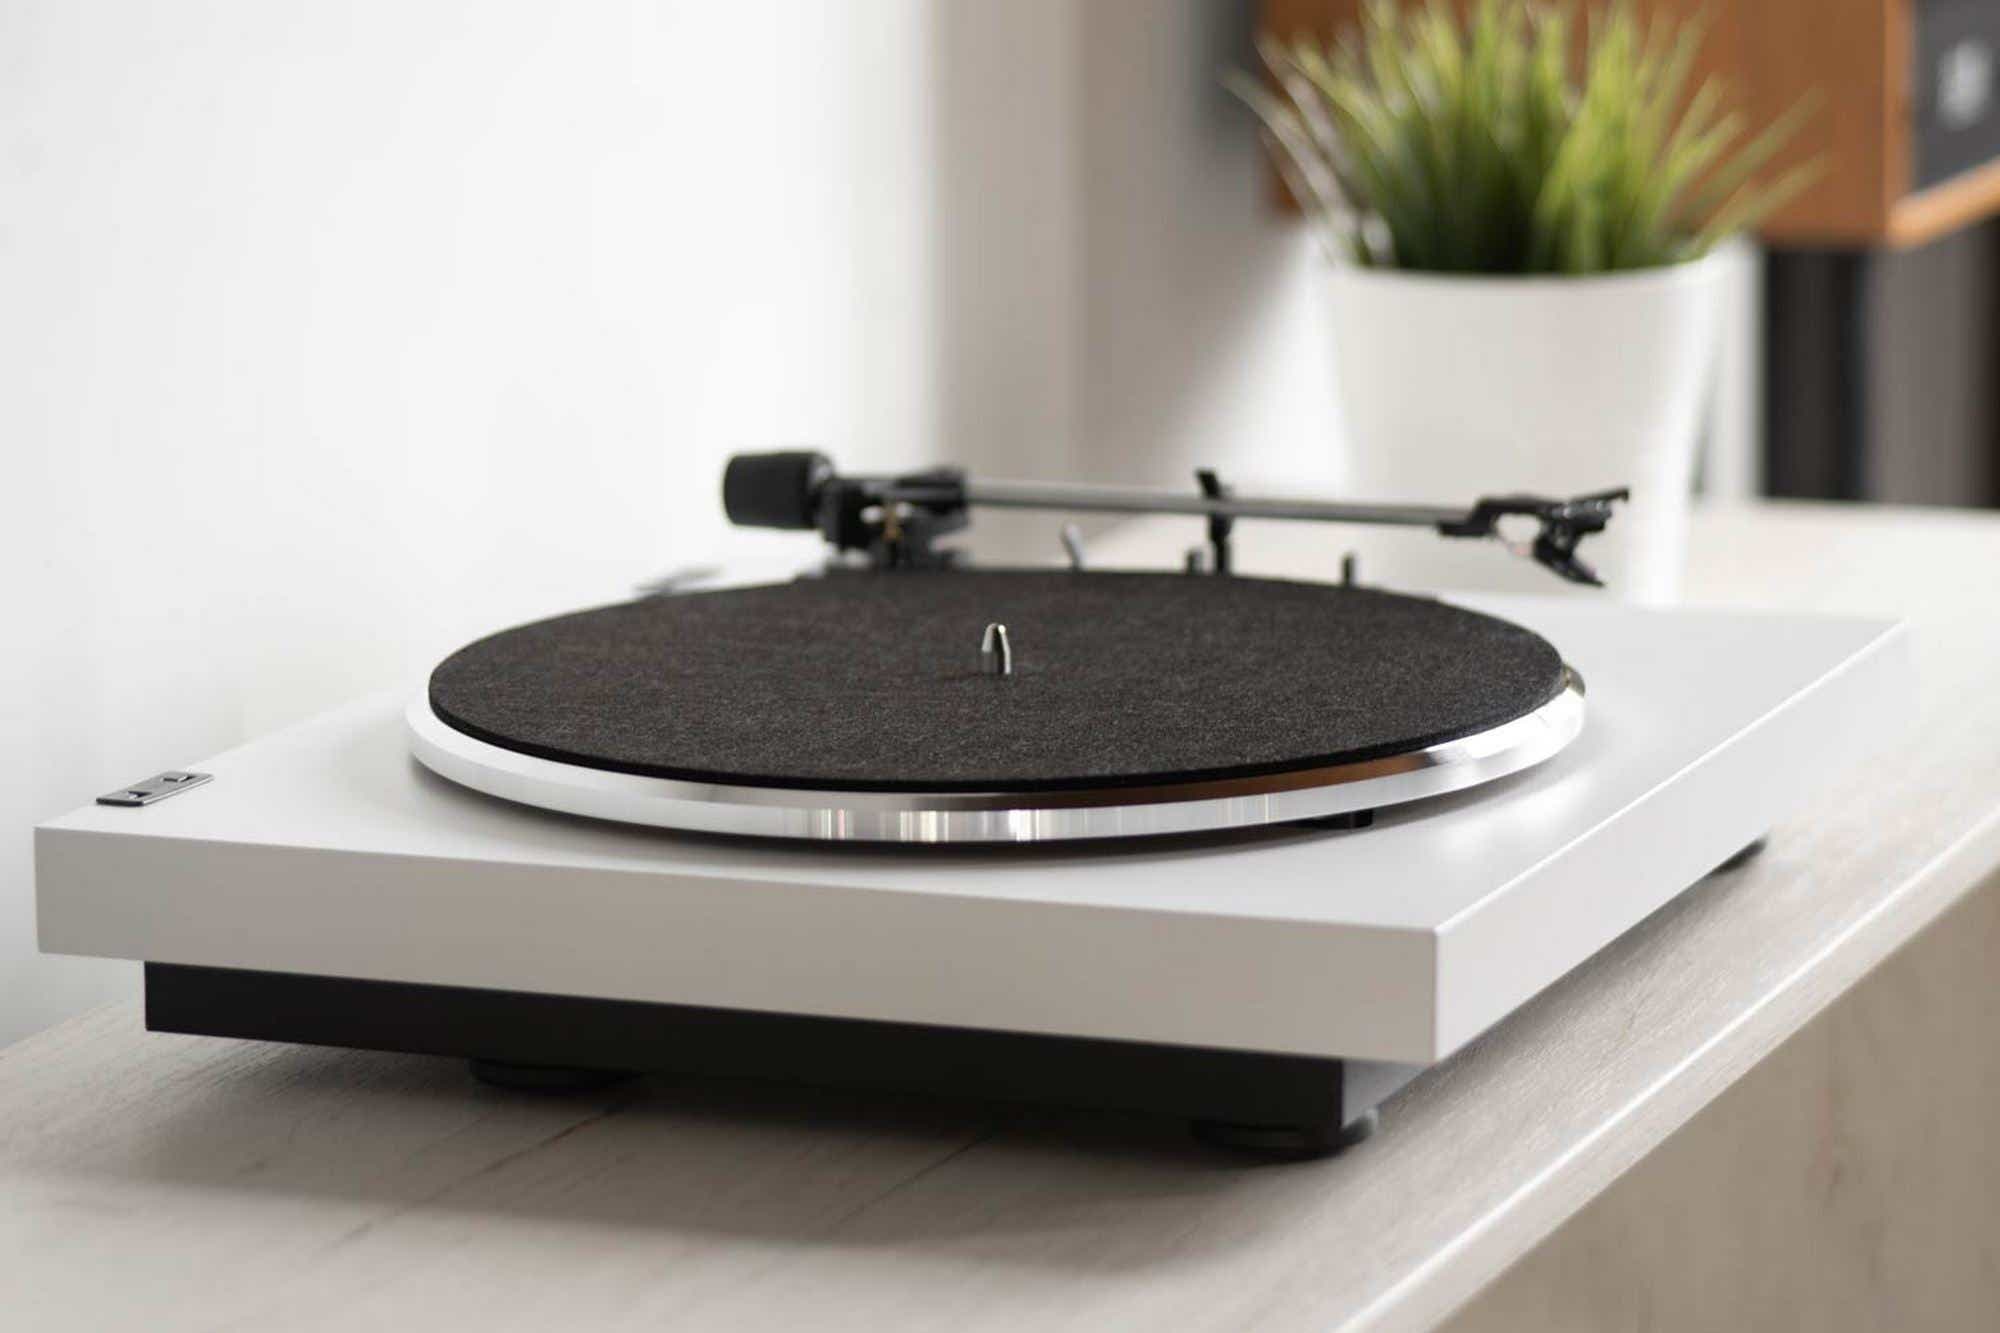 Andover Audio SpinDeck Max -- Best mid-range turntable (less than $600)